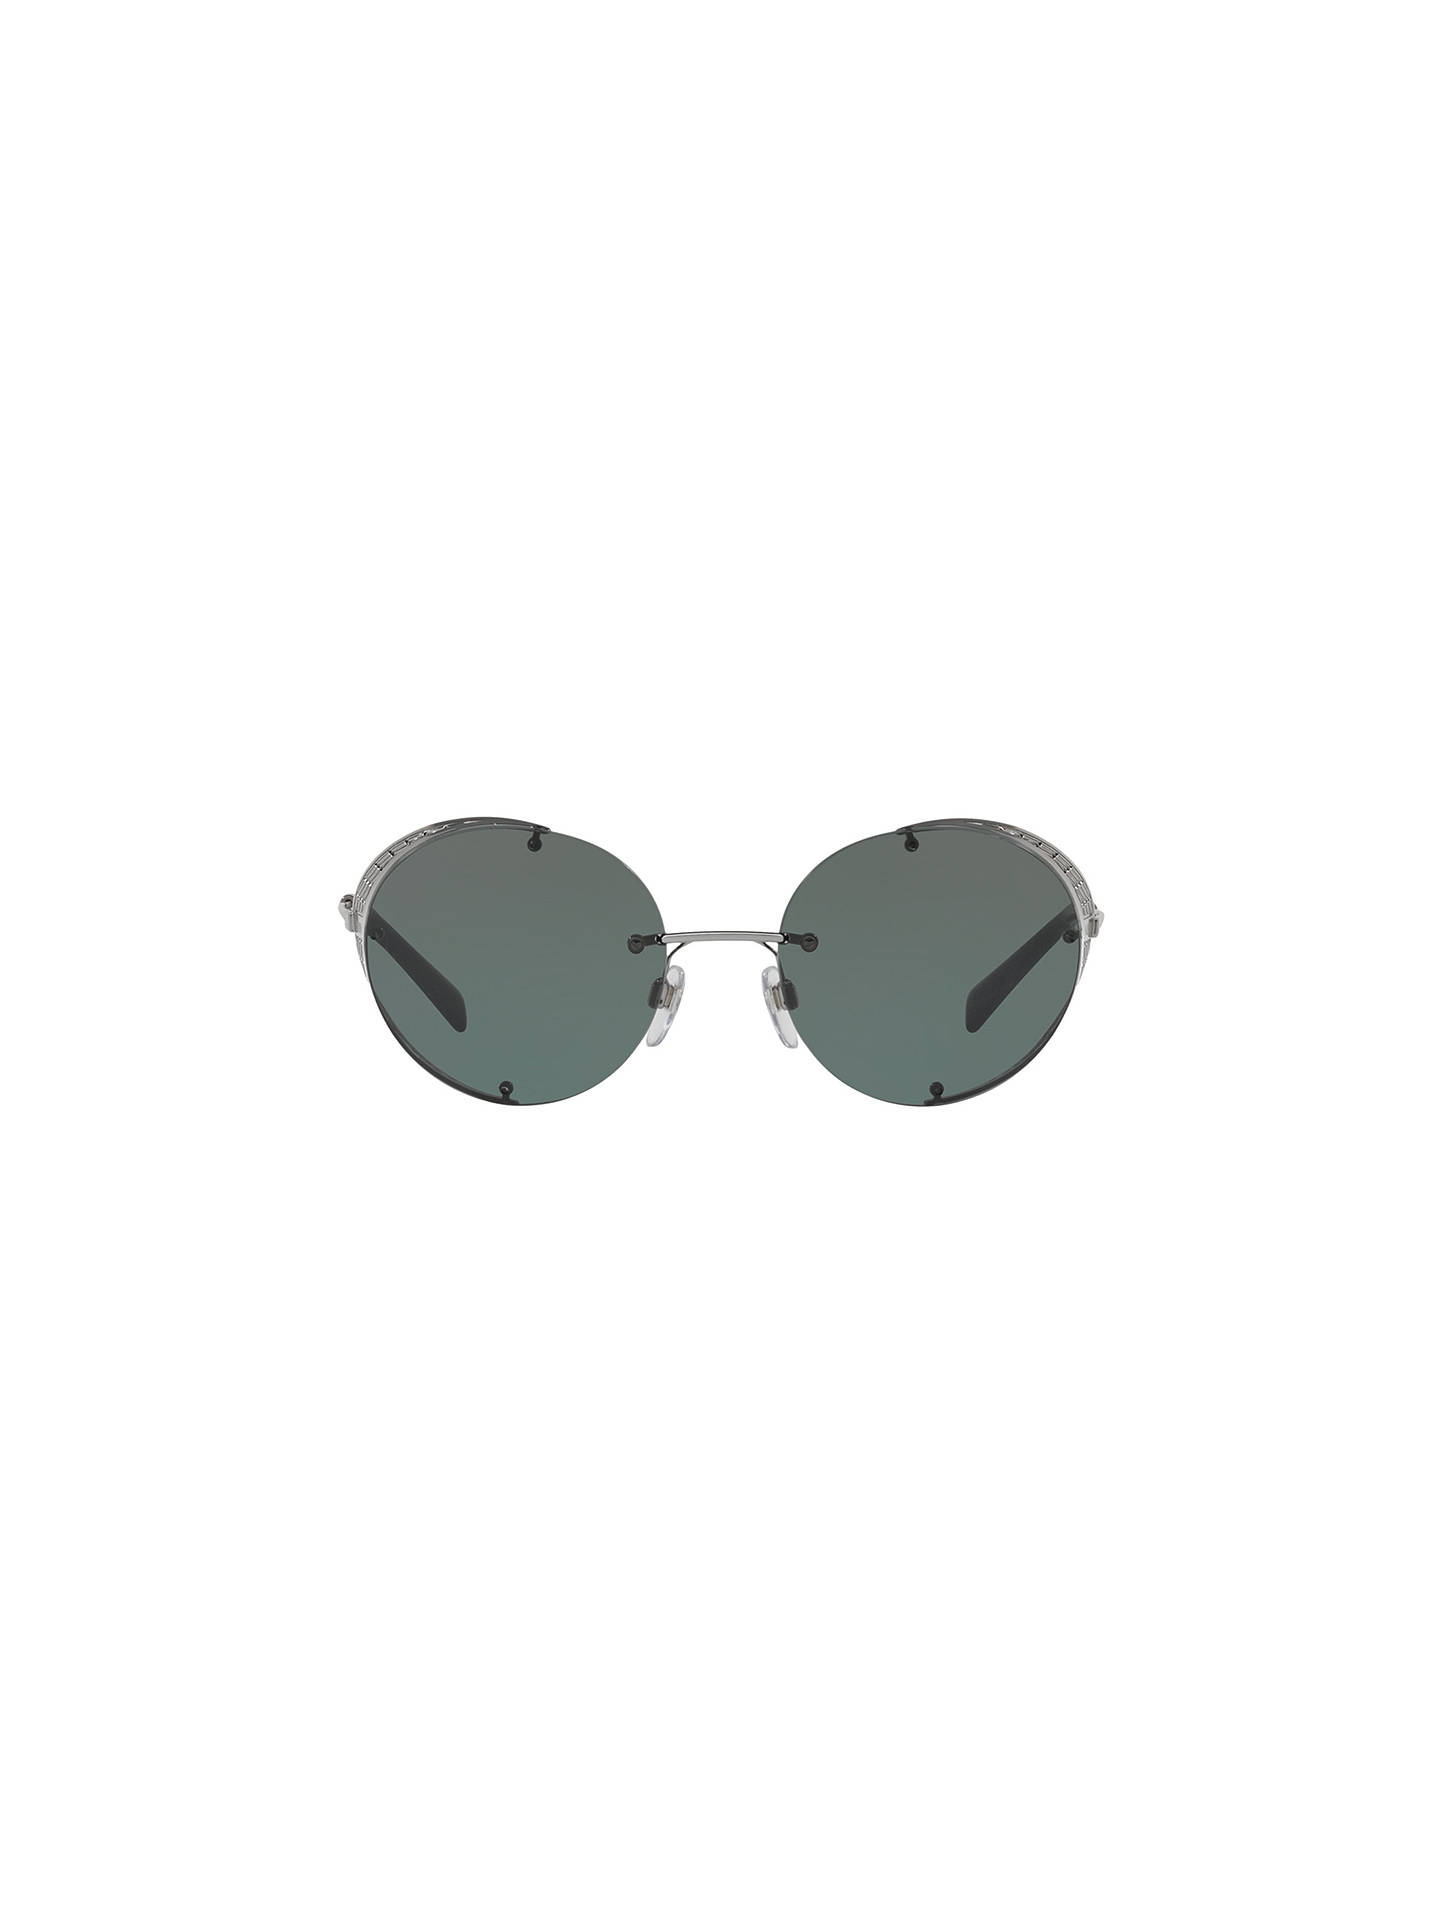 Valentino VA2003 Cut Out Detail Round Sunglasses at John Lewis & Partners